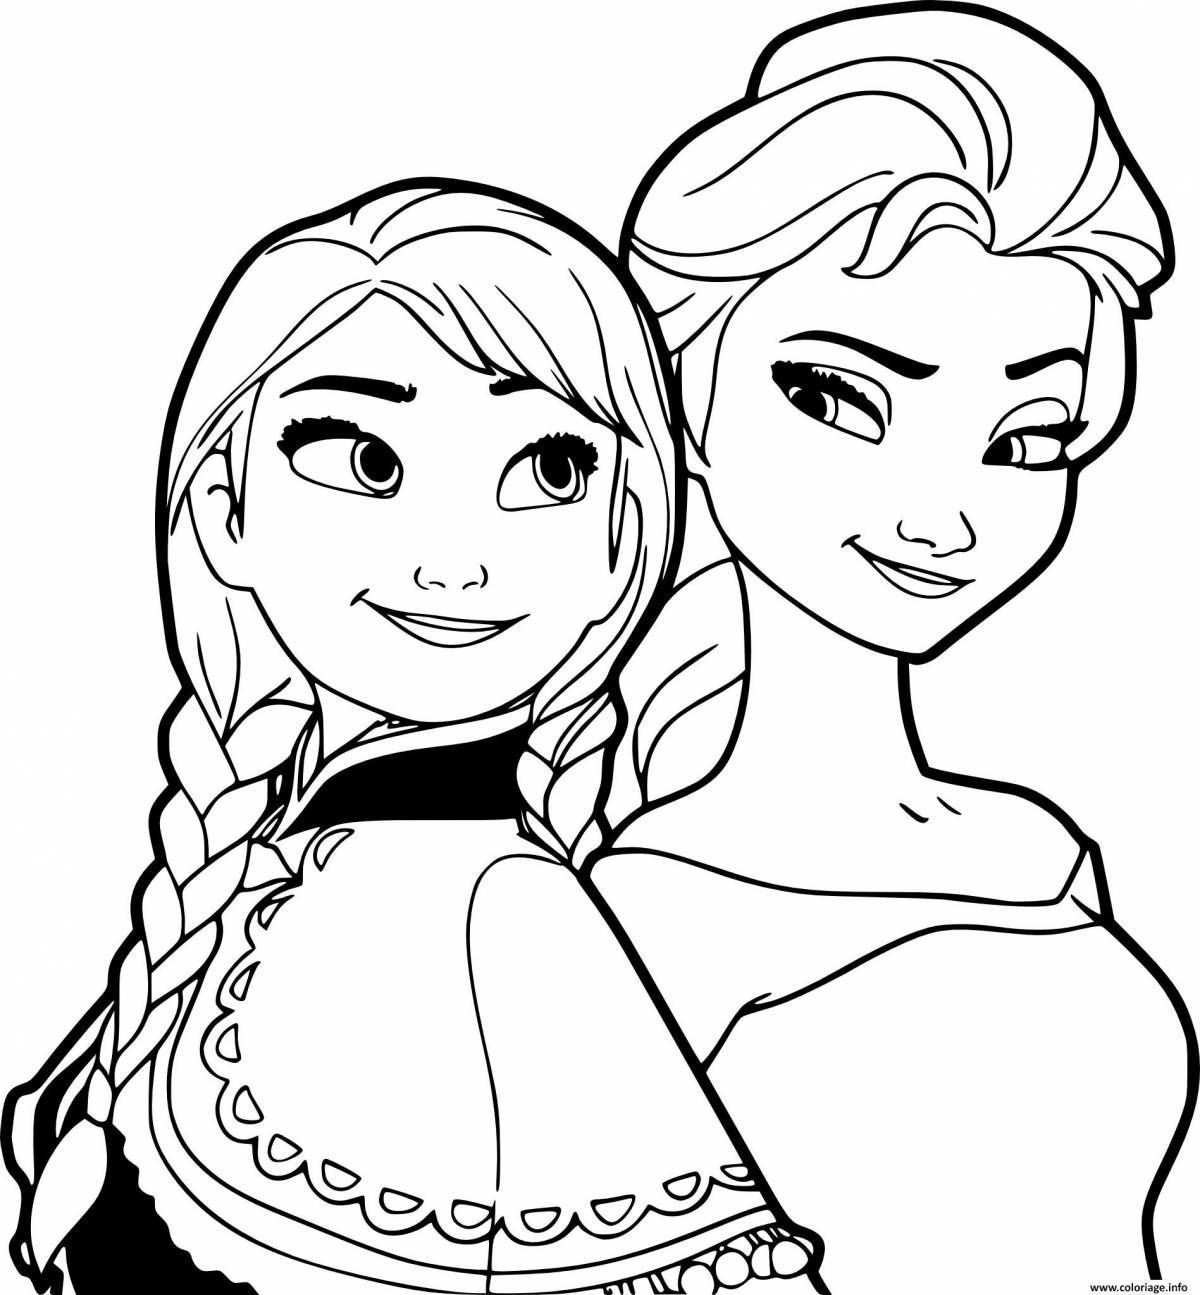 Elsa and Anna Frozen glowing coloring book